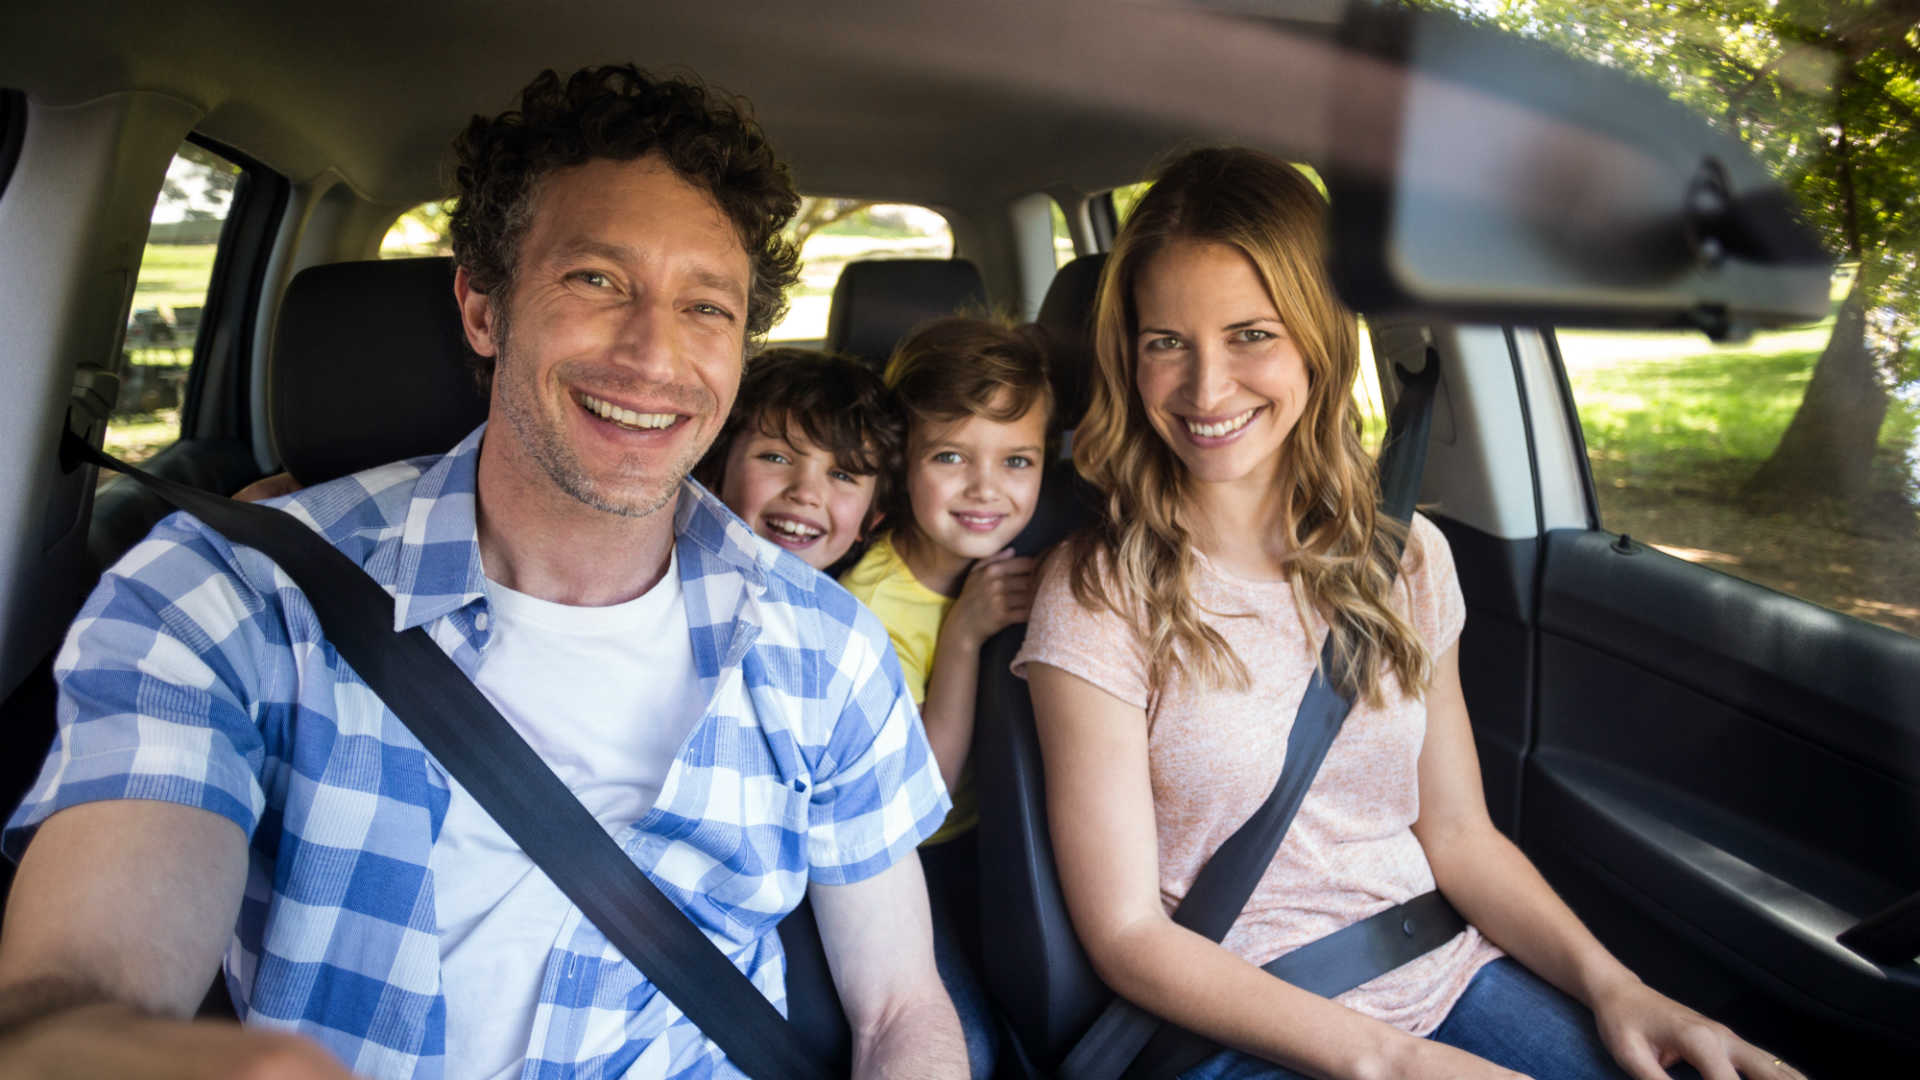 Parents drive an extra 1,648 miles a year for their kids